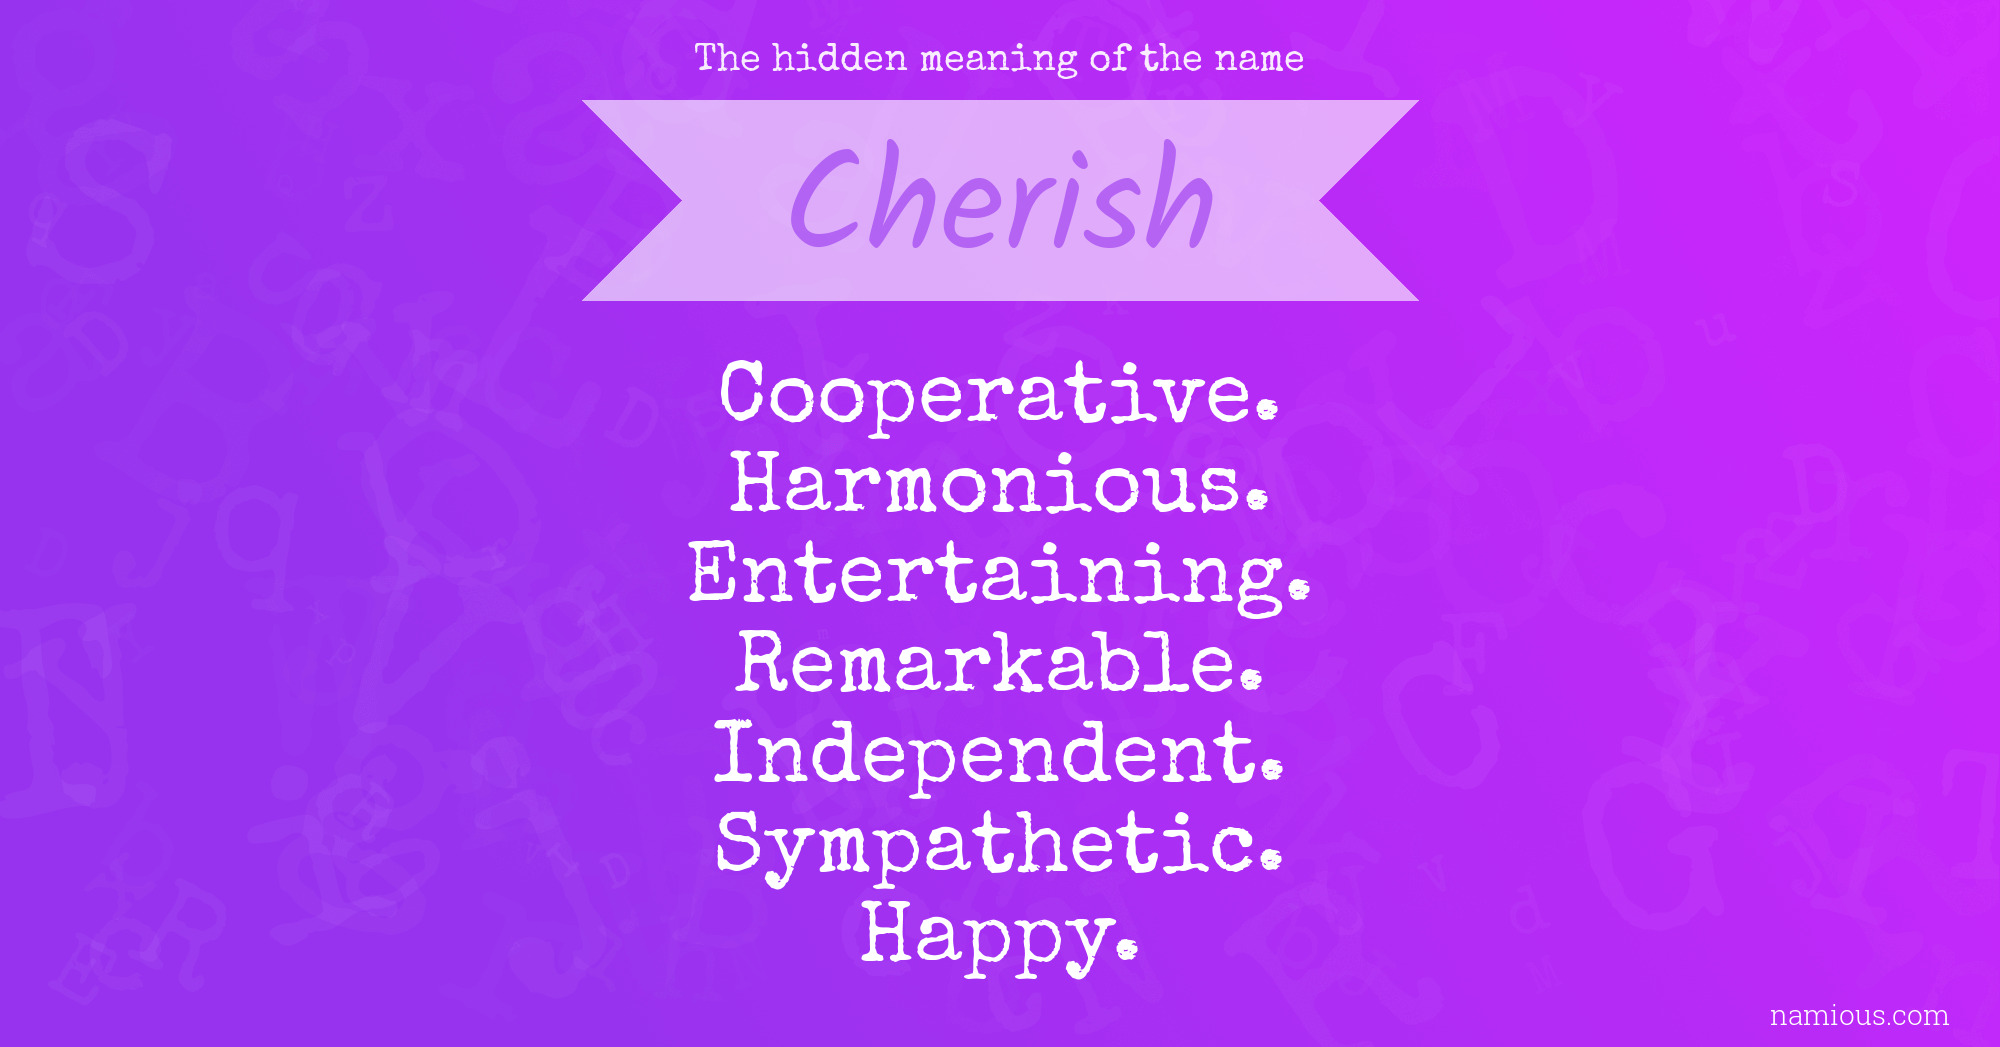 The hidden meaning of the name Cherish